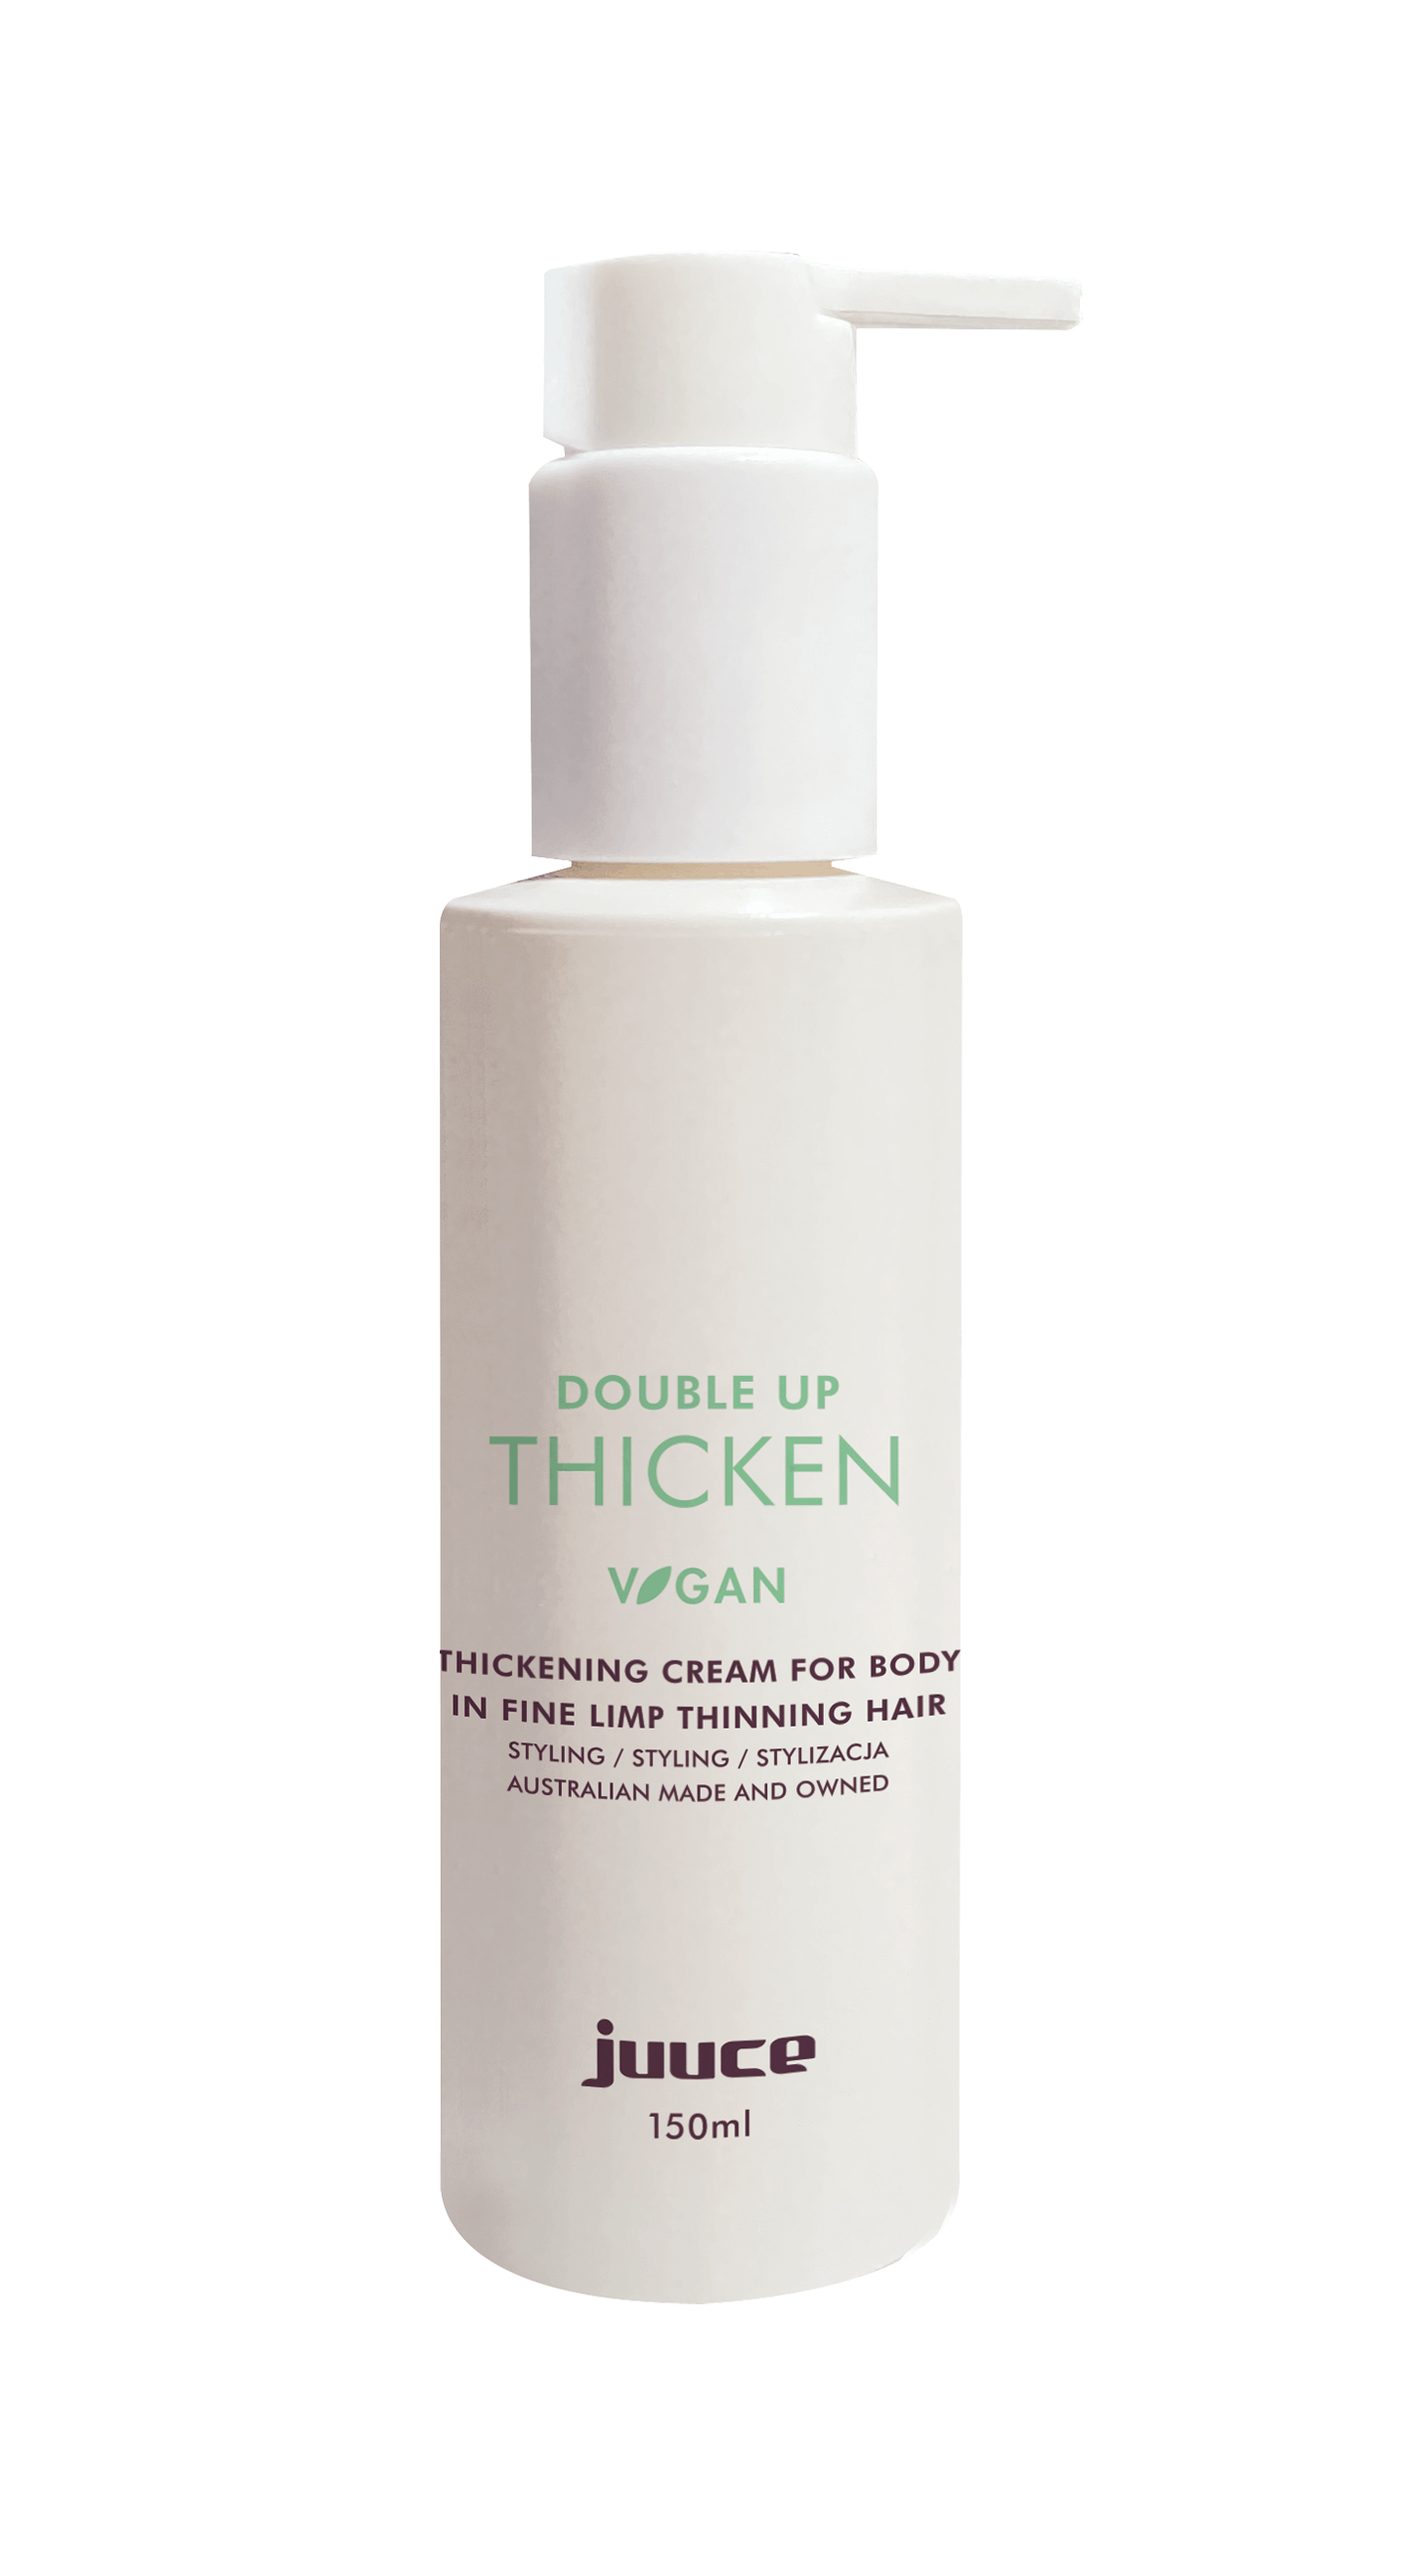 Juuce DOUBLE UP THICKEN 150ML